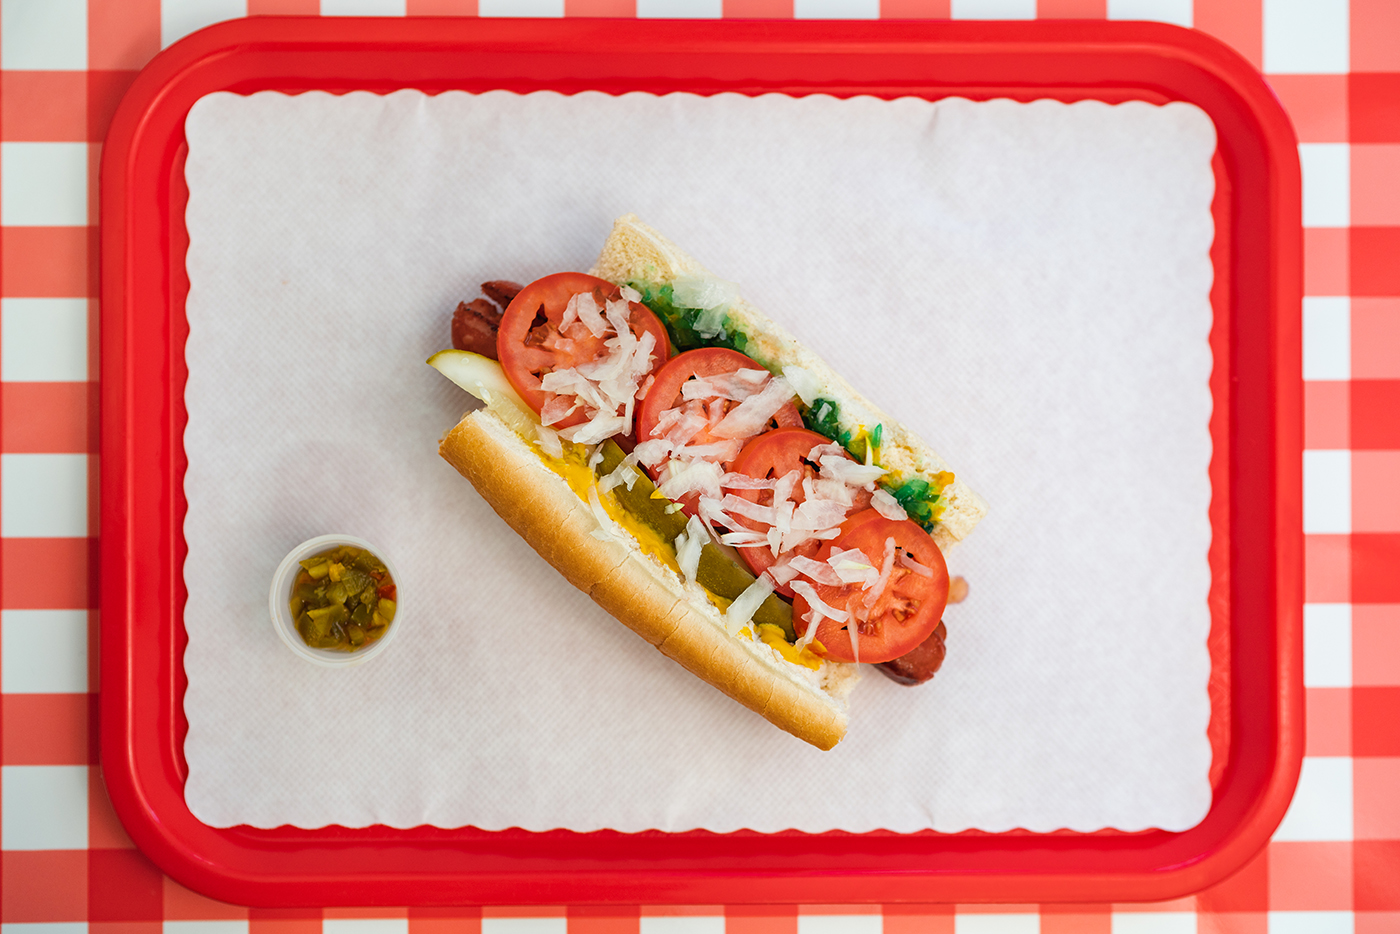 Finding a proper Chicago dog in Utah can often feel hopeless, but Gaetano’s offers a local offering worthy of any Windy City native’s praise.